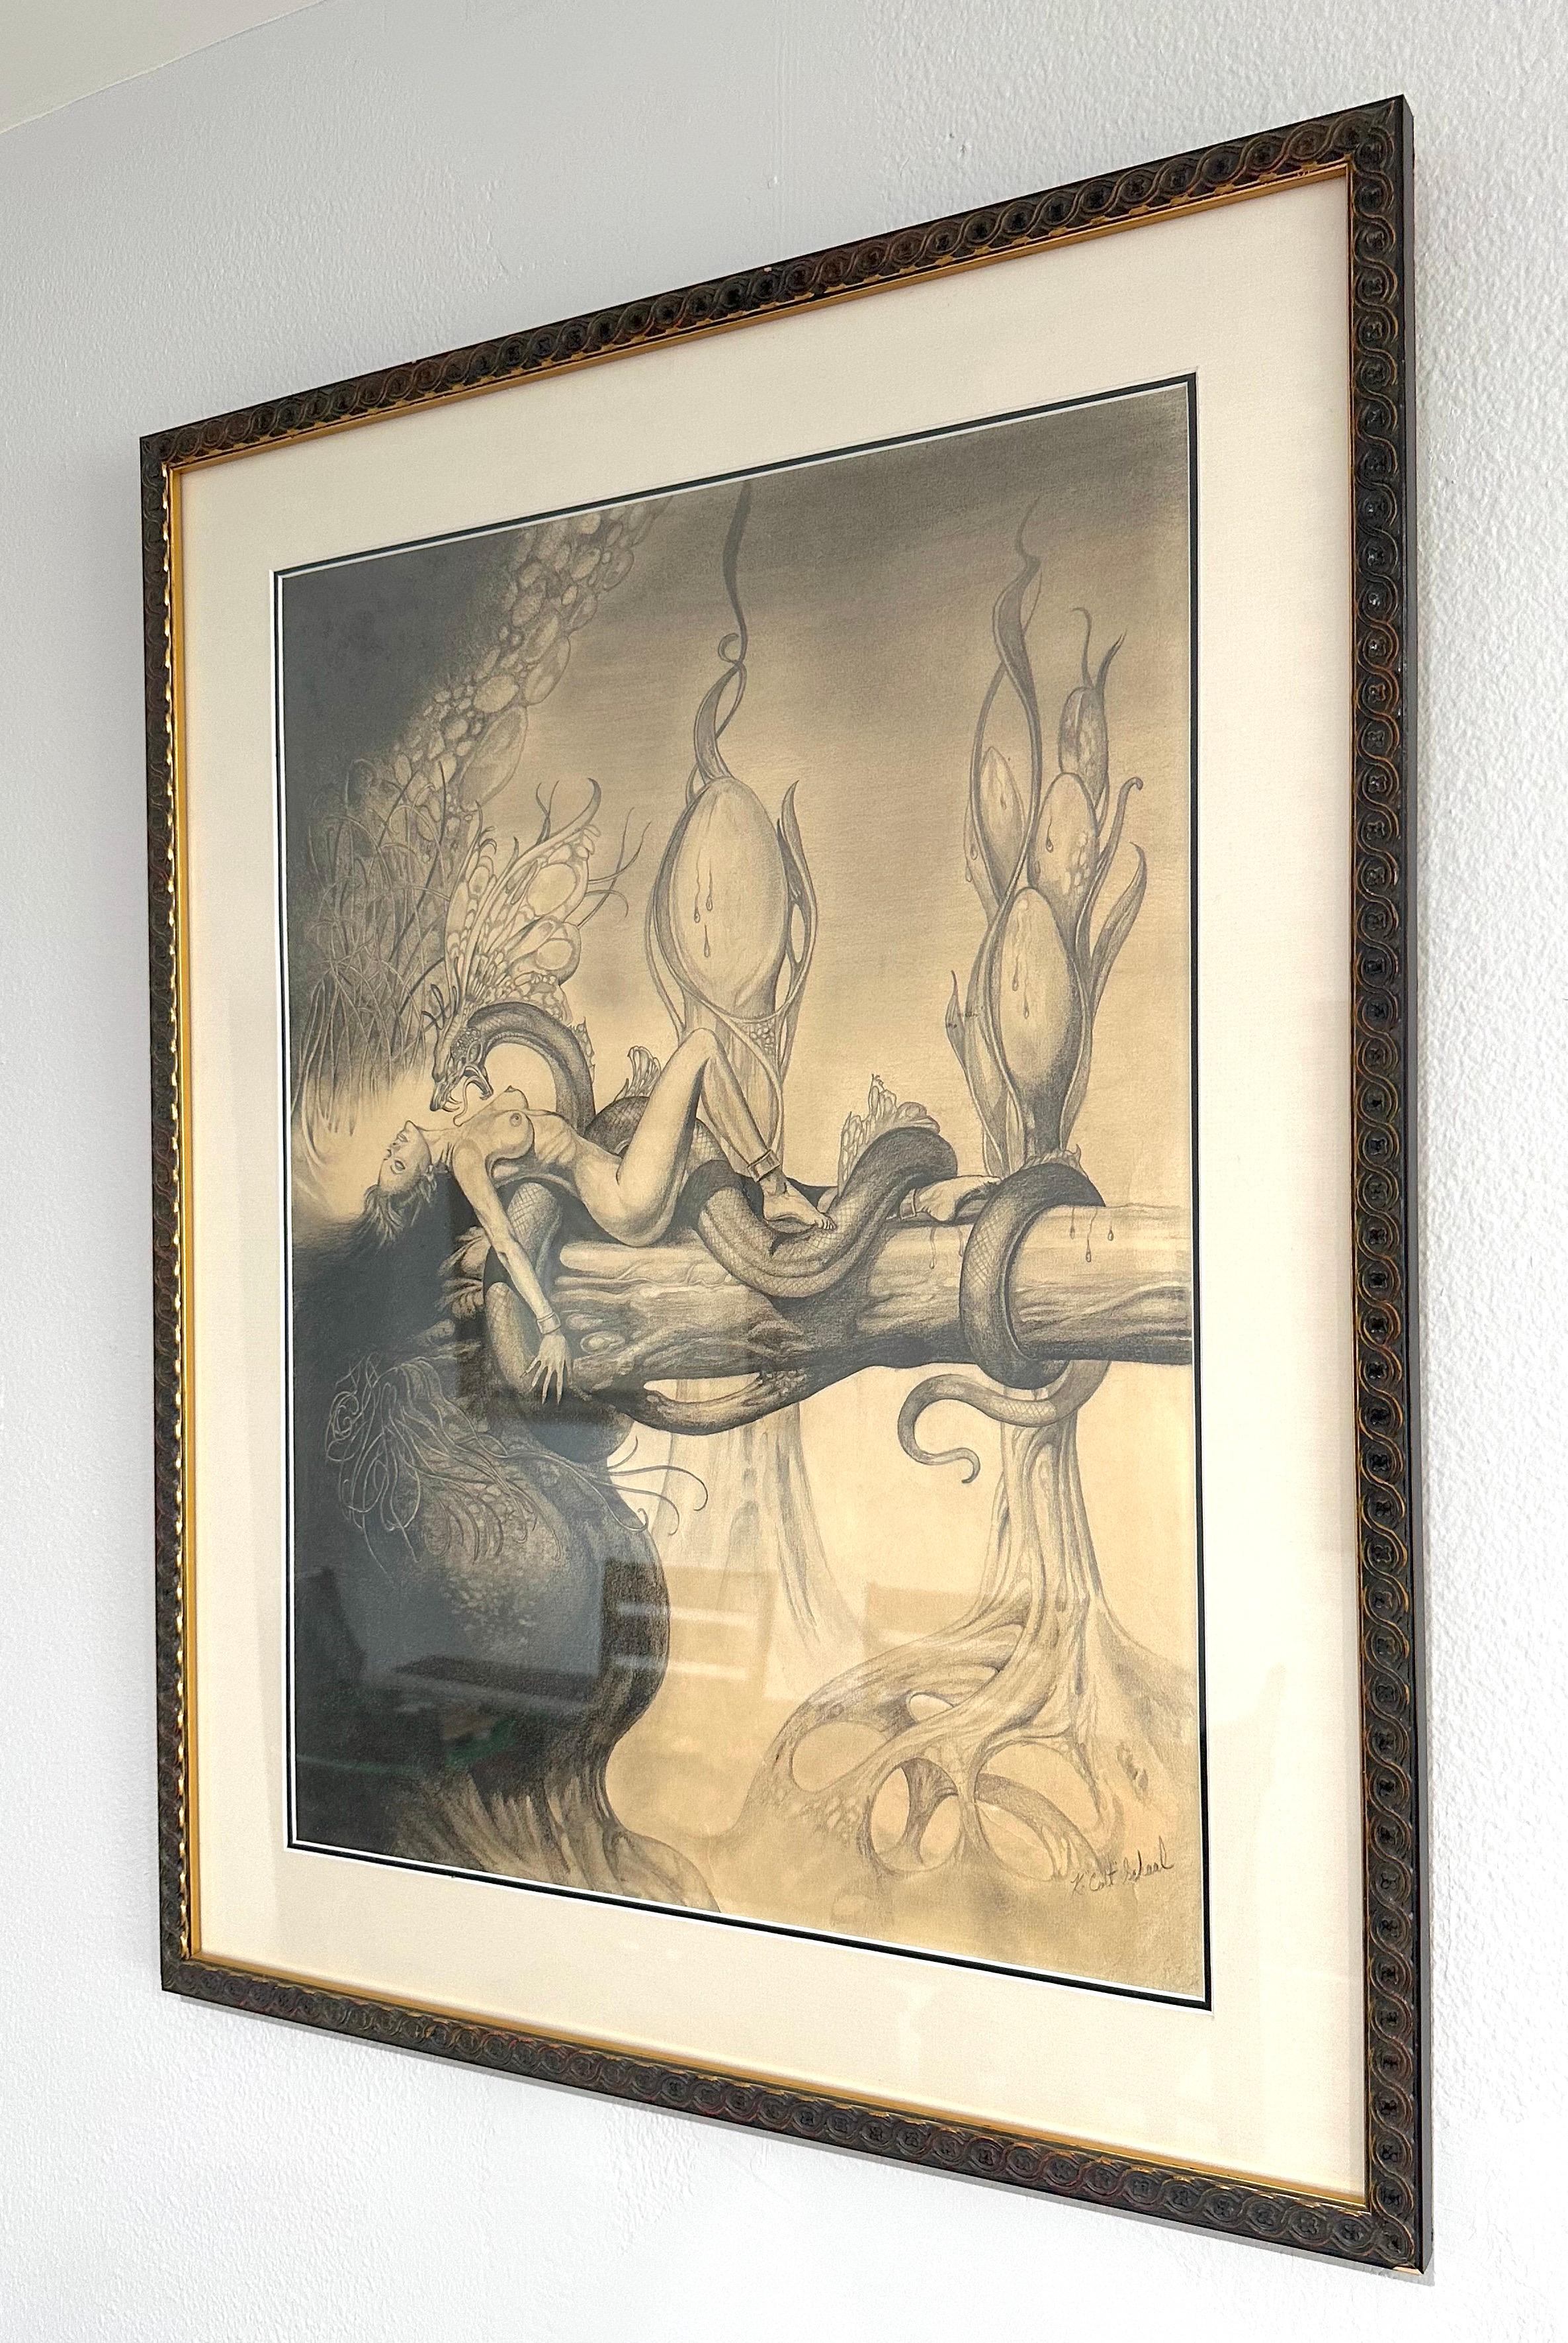 Artist: Colt K Sdall
Work: Original painting, handmade artwork, one of a kind 
Medium: Graphic on Paper, Drawing,
Year: 1900 ?
Style: Surrealism
Size: 29